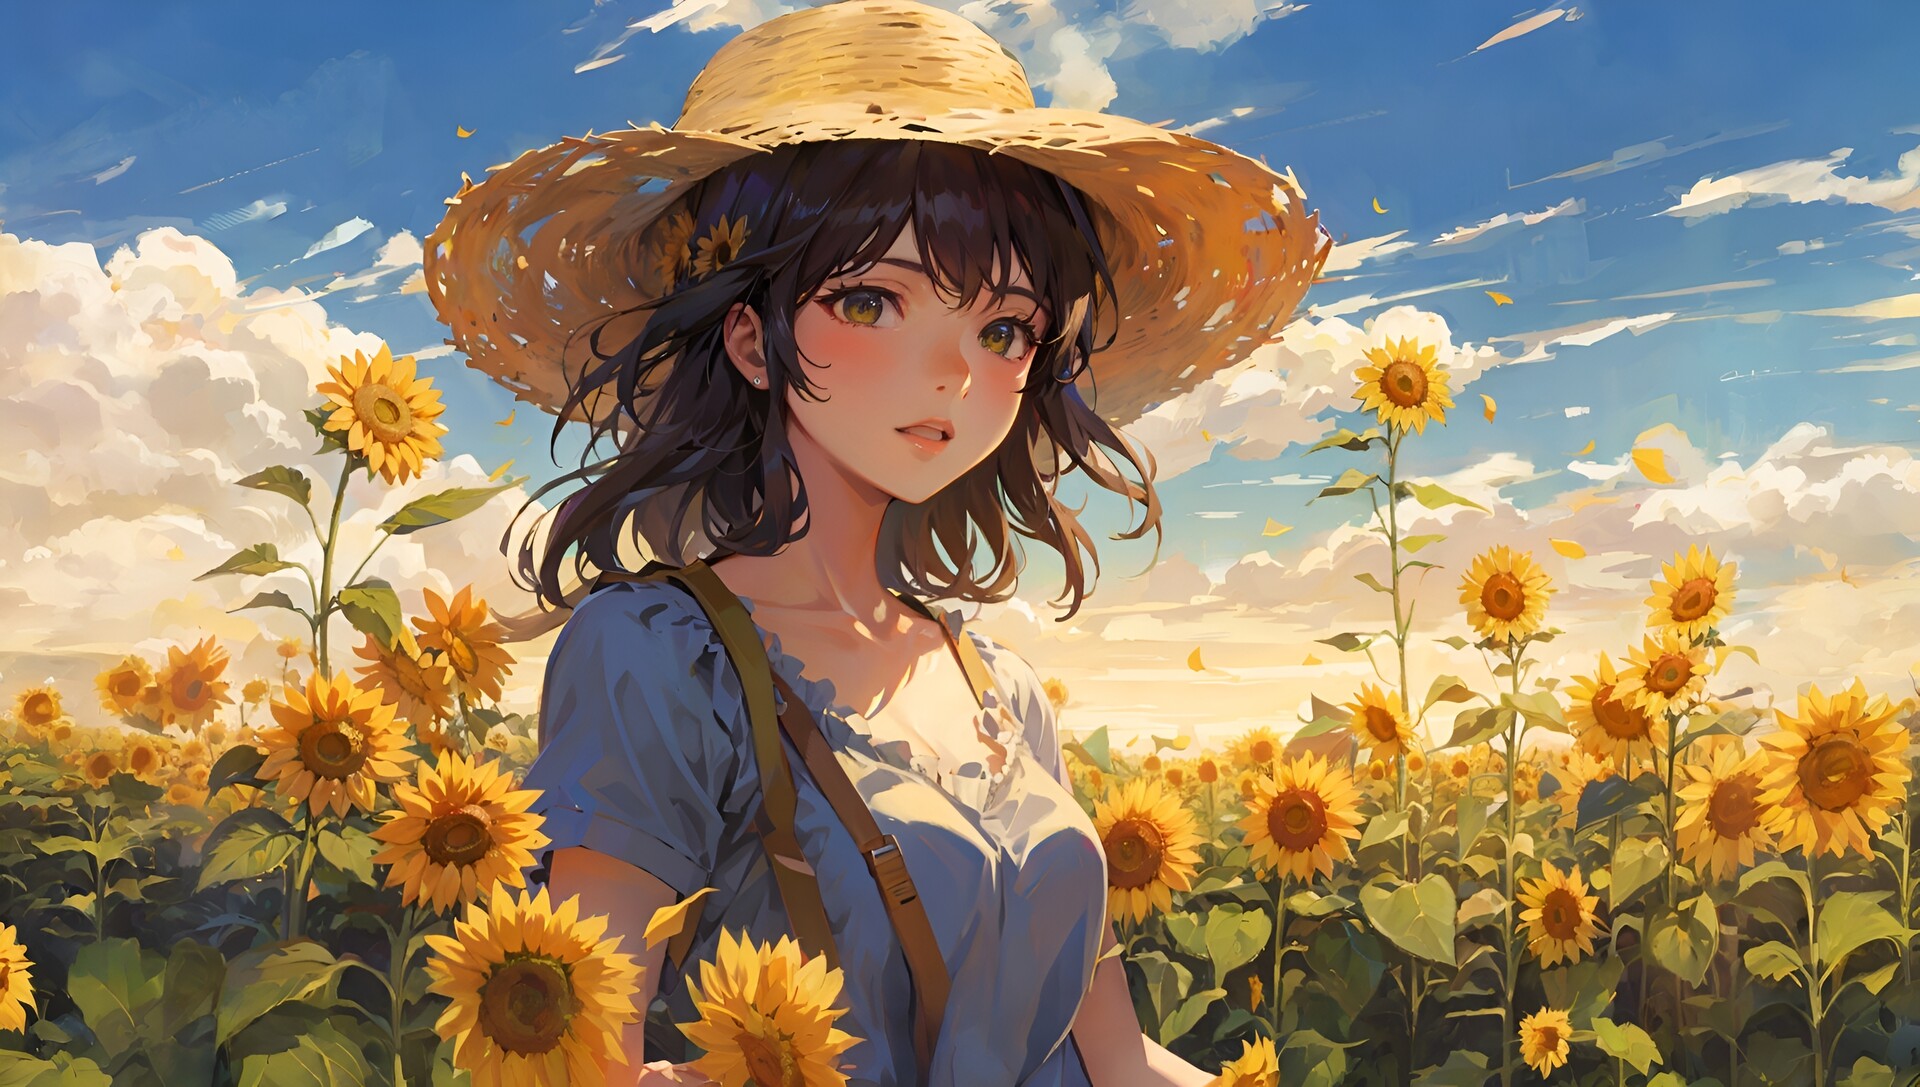 https://cdnb.artstation.com/p/assets/images/images/066/550/389/large/chicken_ash-default-girl-with-straw-hat-sunflower-field-spectacular-view-m-0-287b8c53-a359-4f6a-a262-ffe9d5ddf07c-1.jpg?1693195562